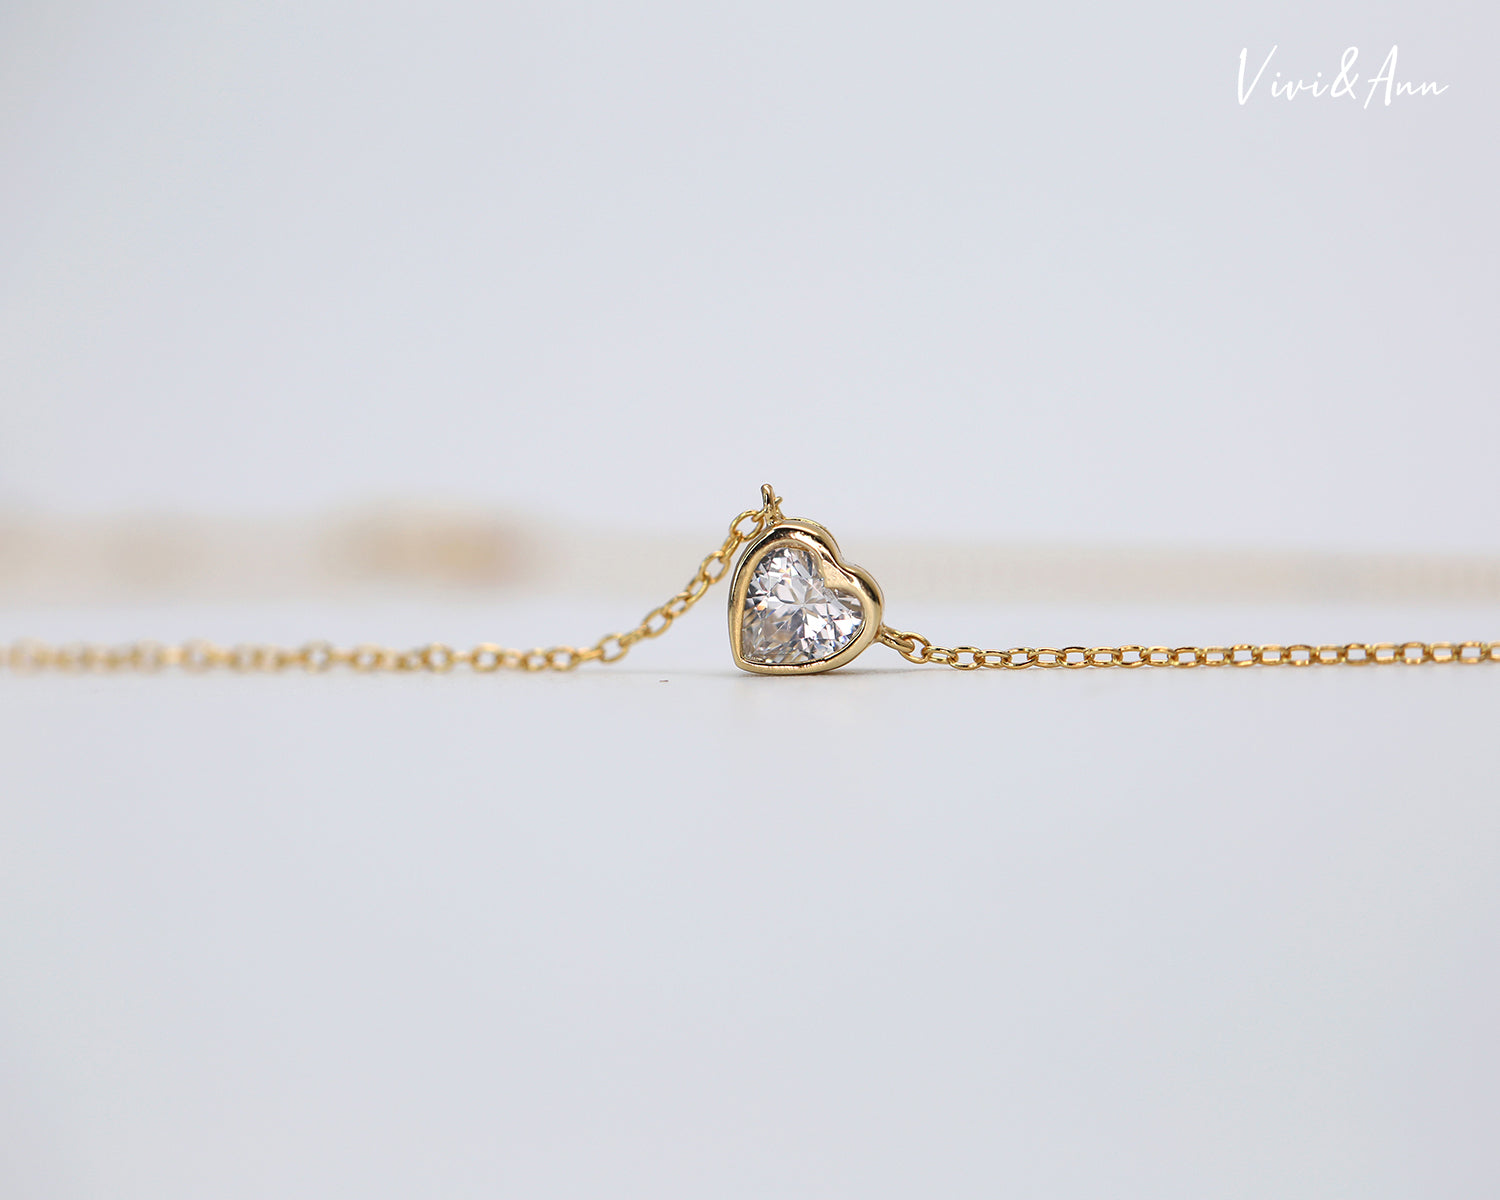 Little Heart Necklace 18K White Gold Over Sterling Silver